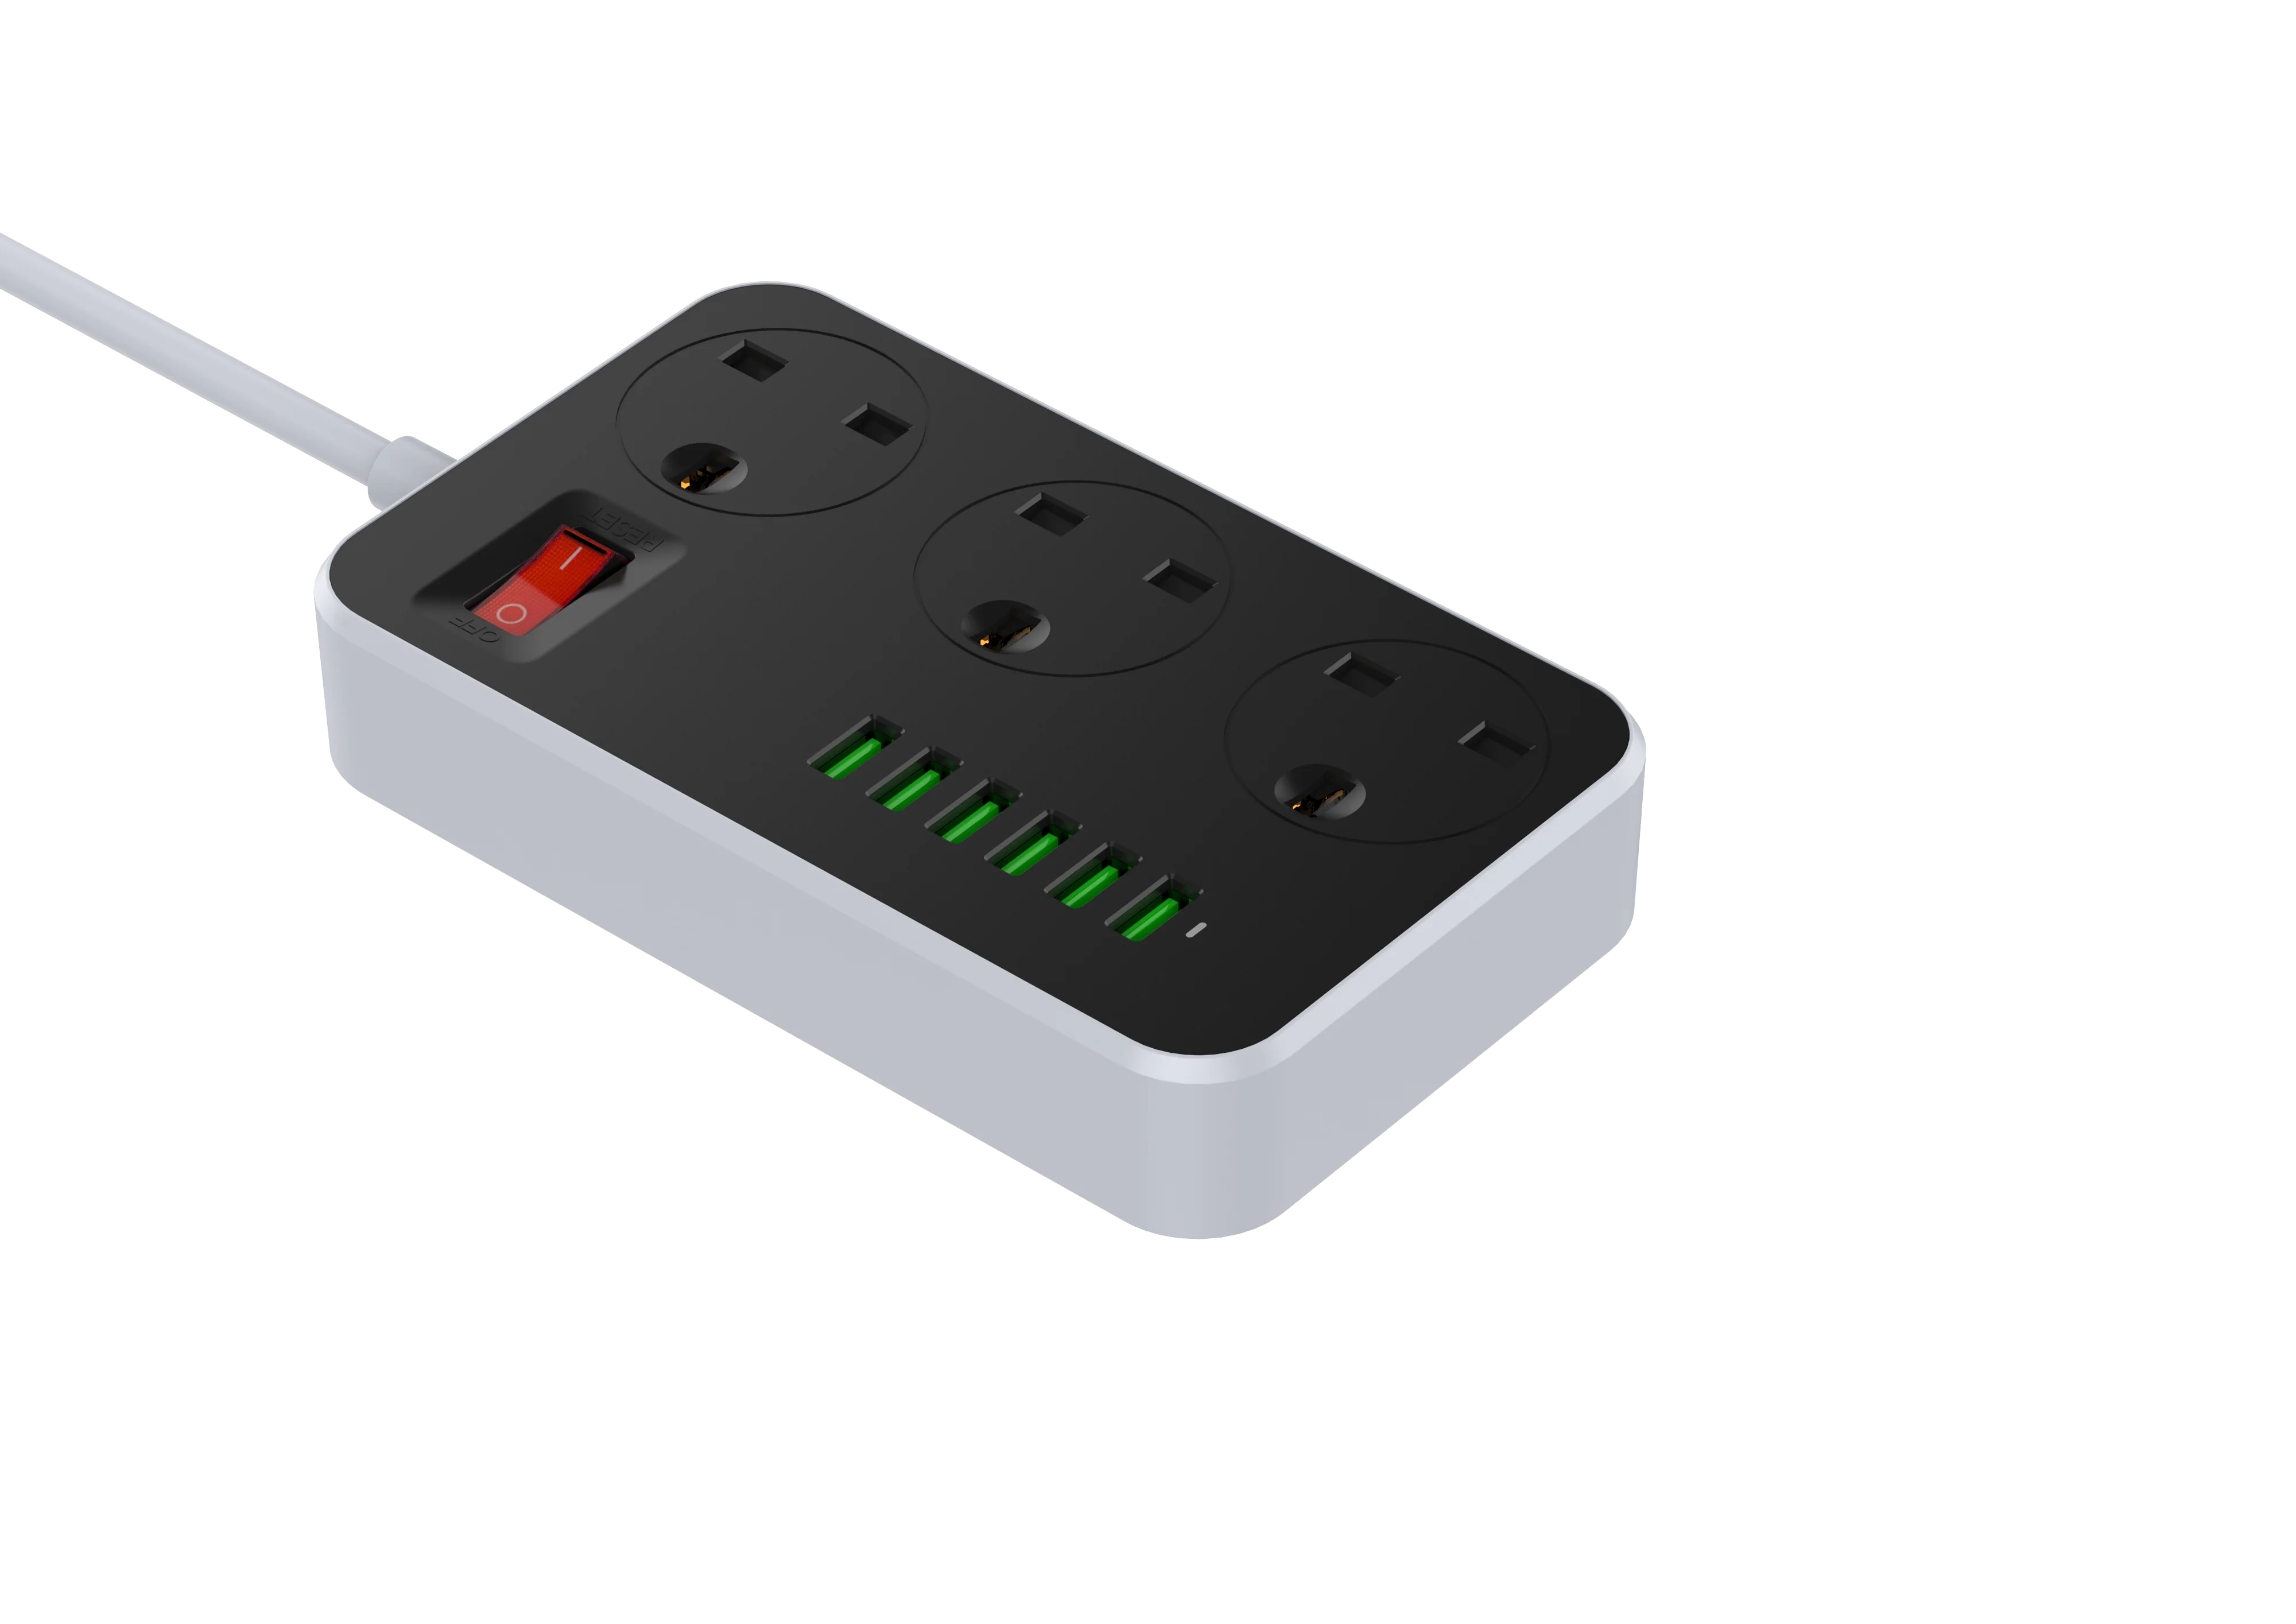 
LDNIO CLASSIC UK STANDARD 3 WAY SURGE POWER STRIP SK3662 WITH 6USB PORTS 2METERS POWER CORD POWER STRIP 